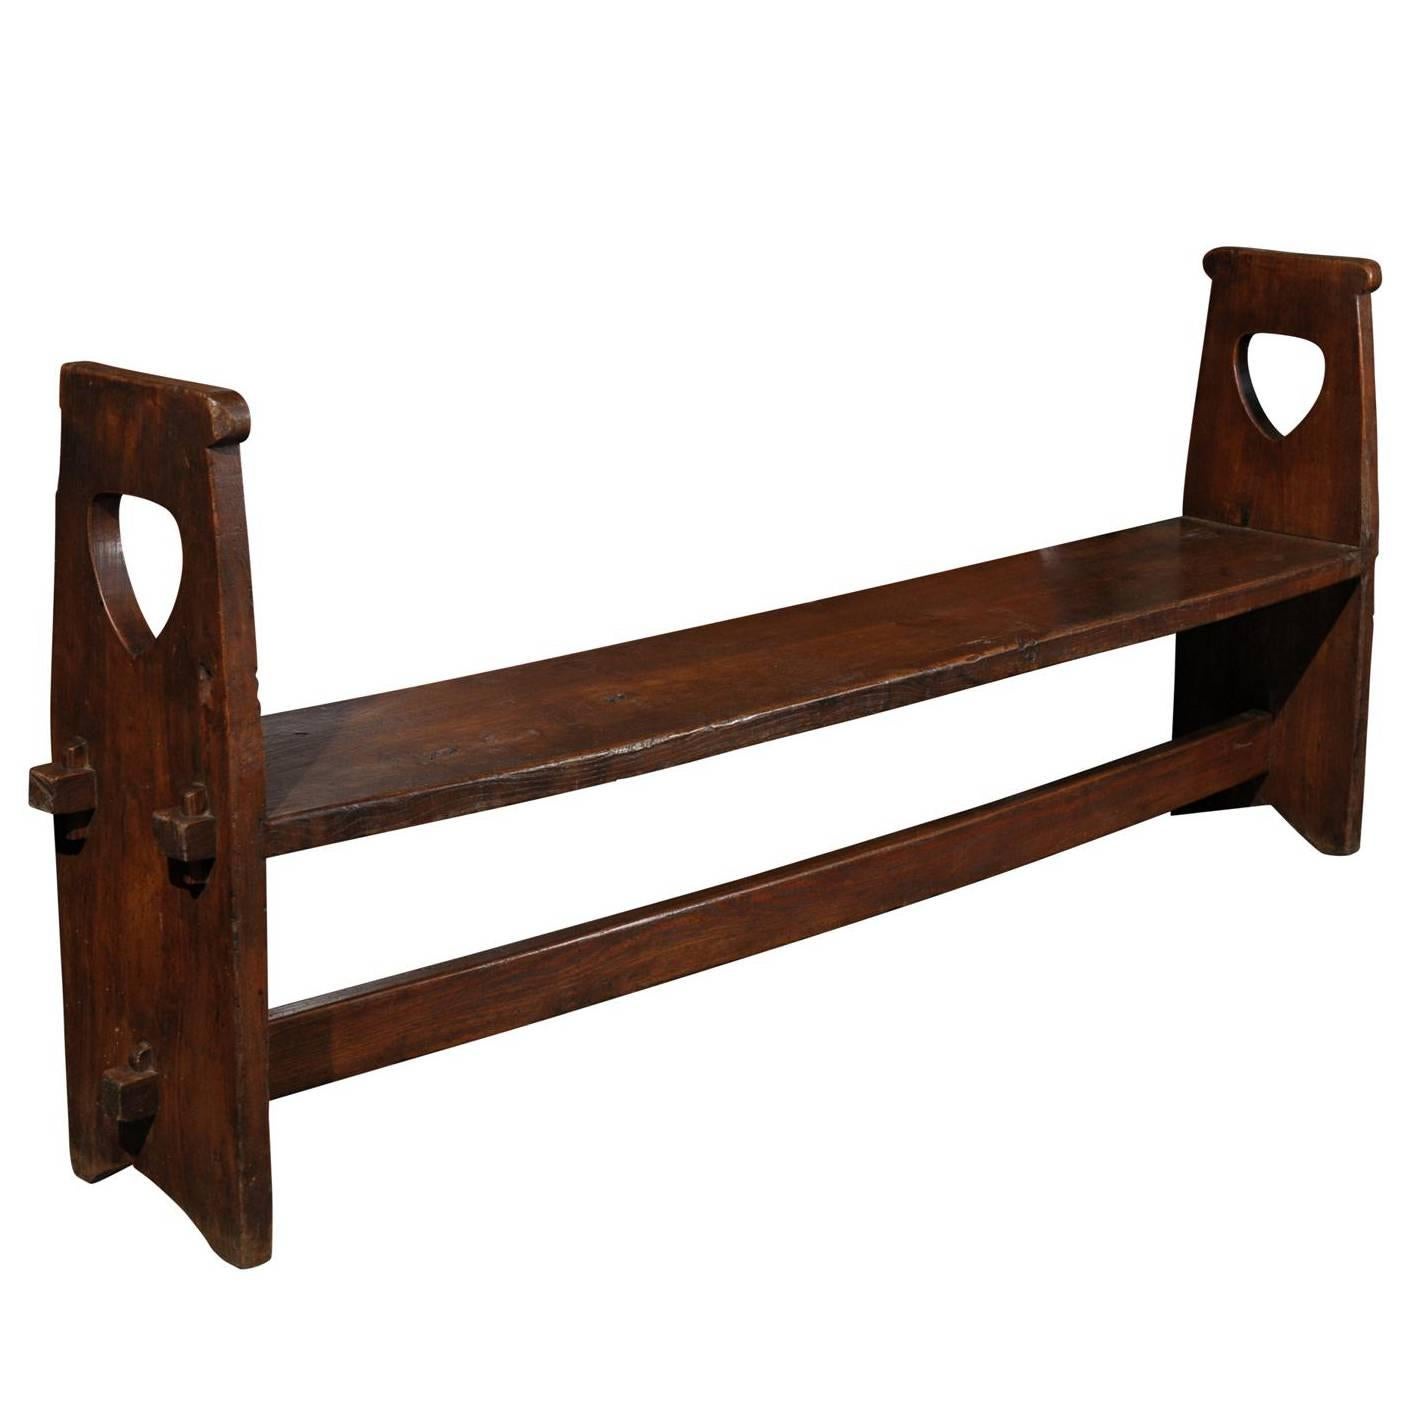 Narrow Tuscan Italian Wooden Bench with Stretcher from the Early 19th century For Sale